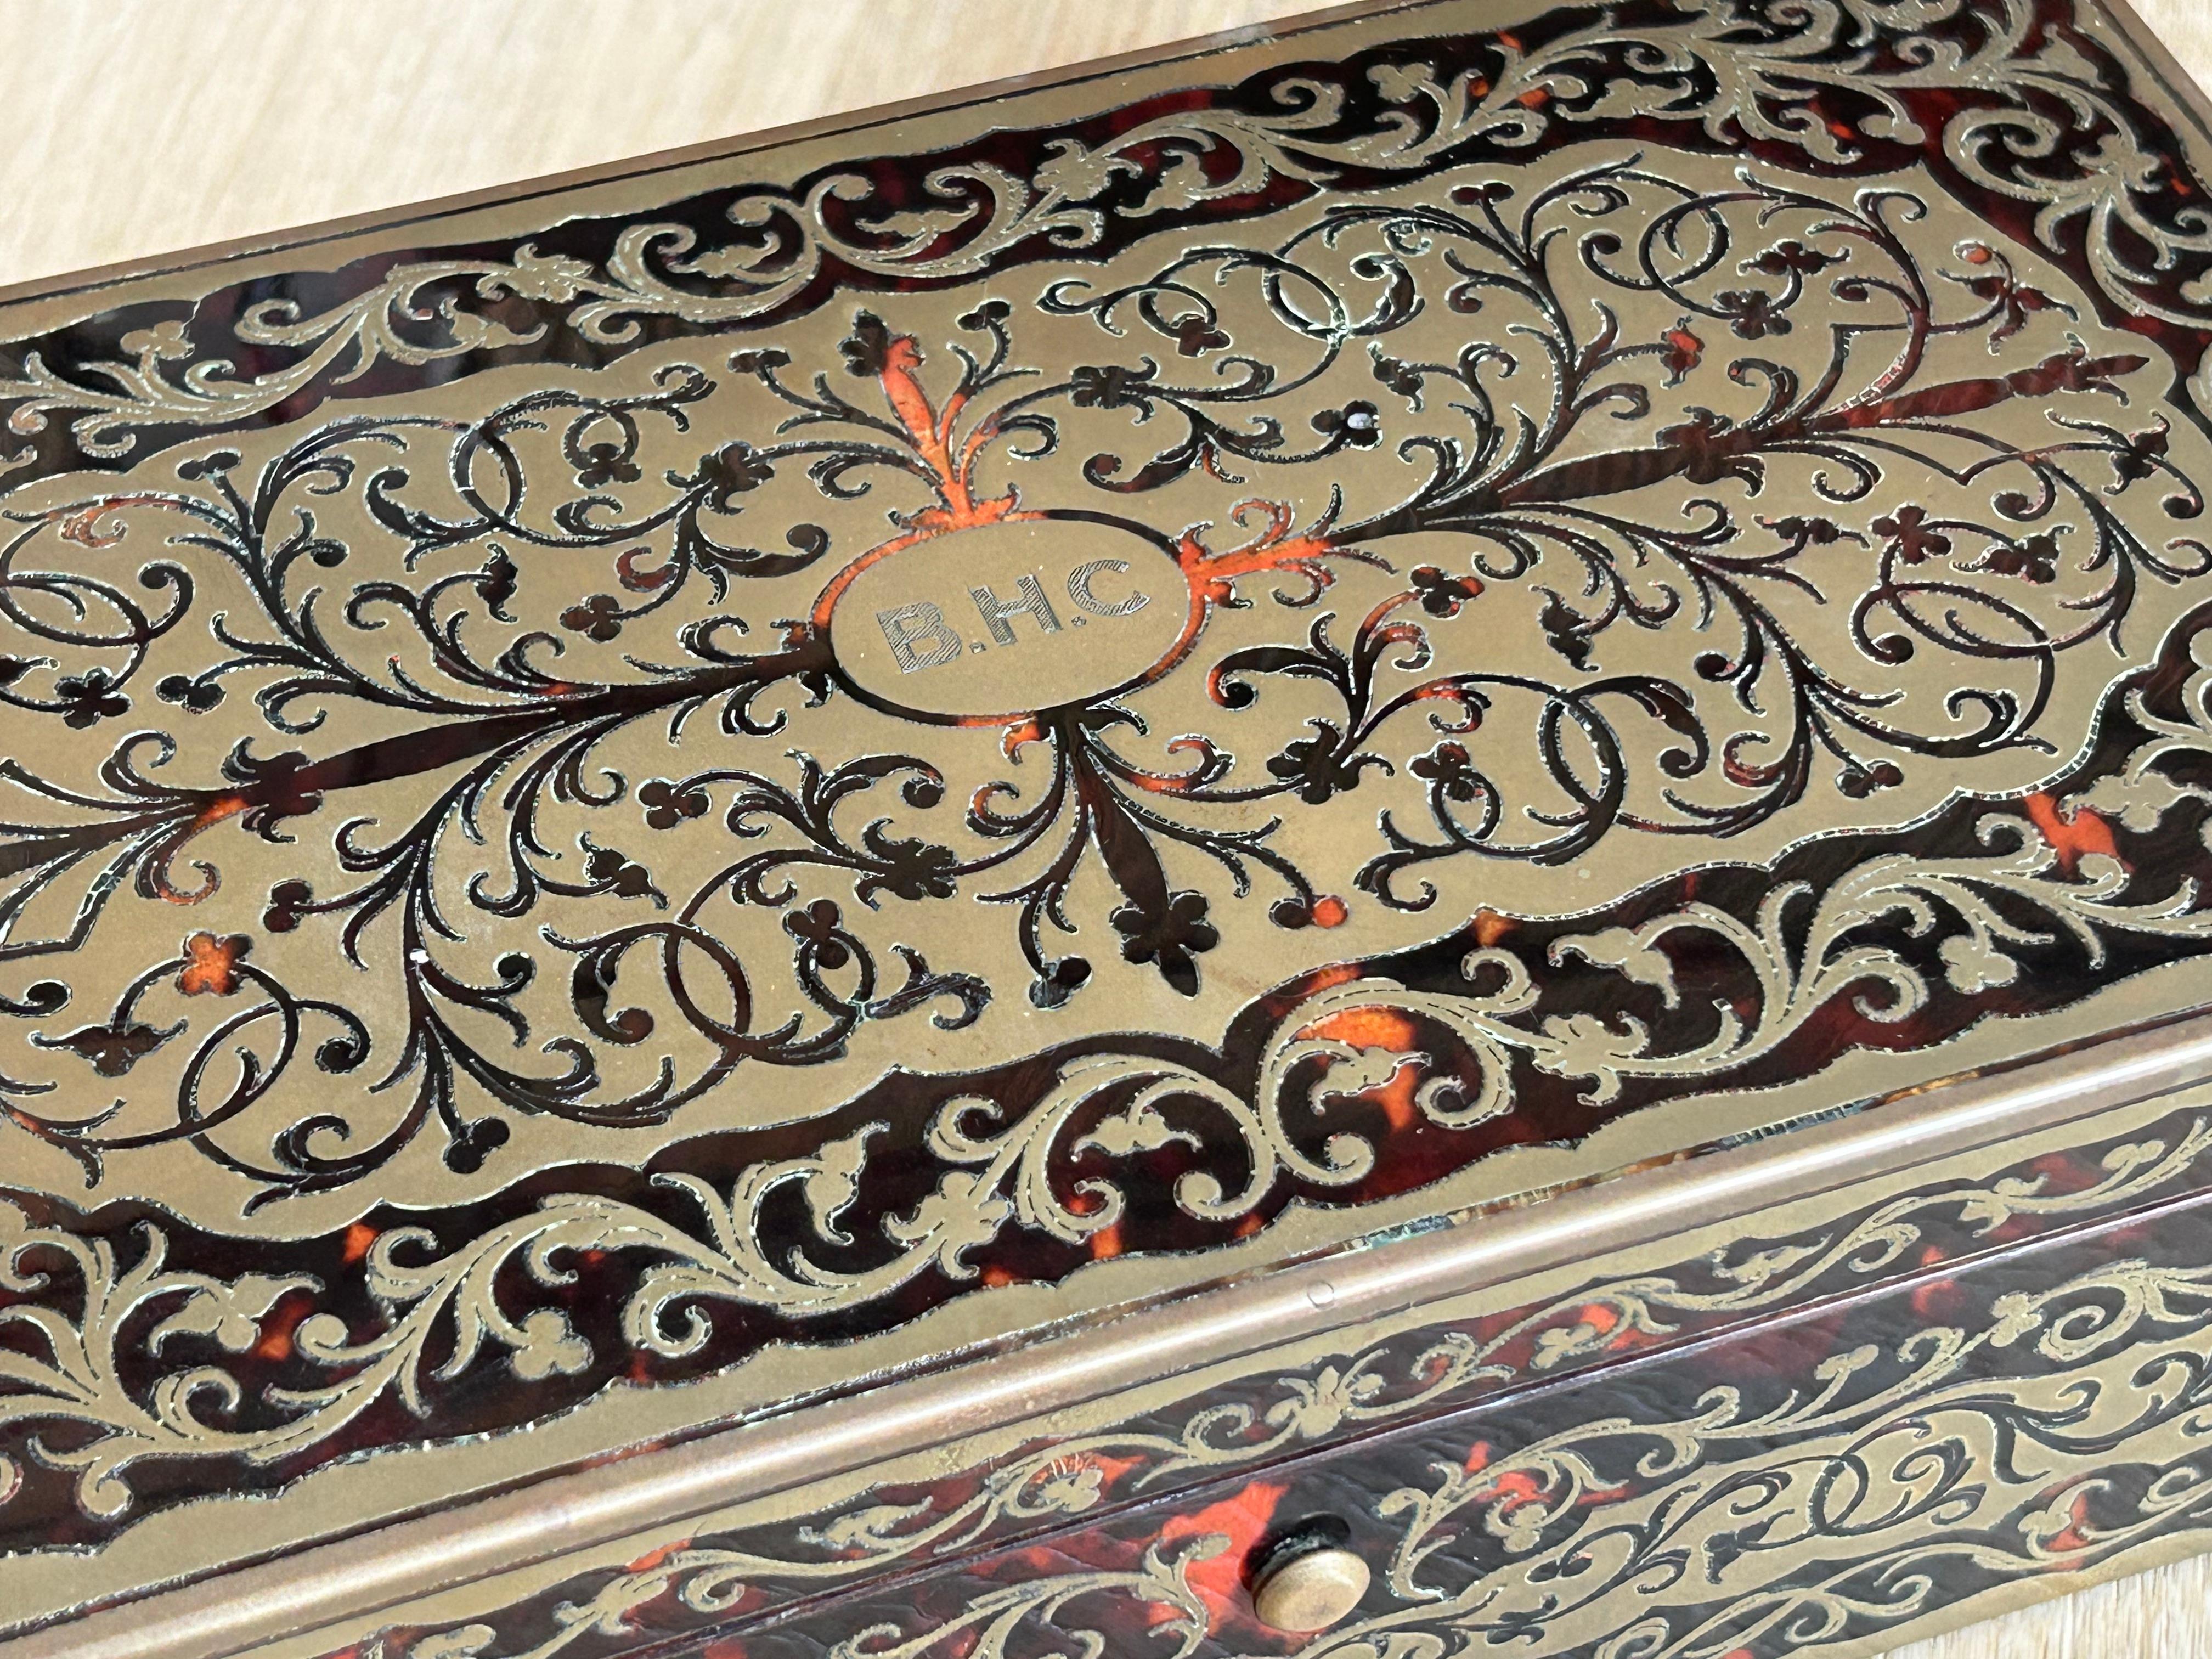 Card Box in the style of École Boulle by JC Vickery with tortoiseshell and brass inlay, engraved on the lid by the initials 